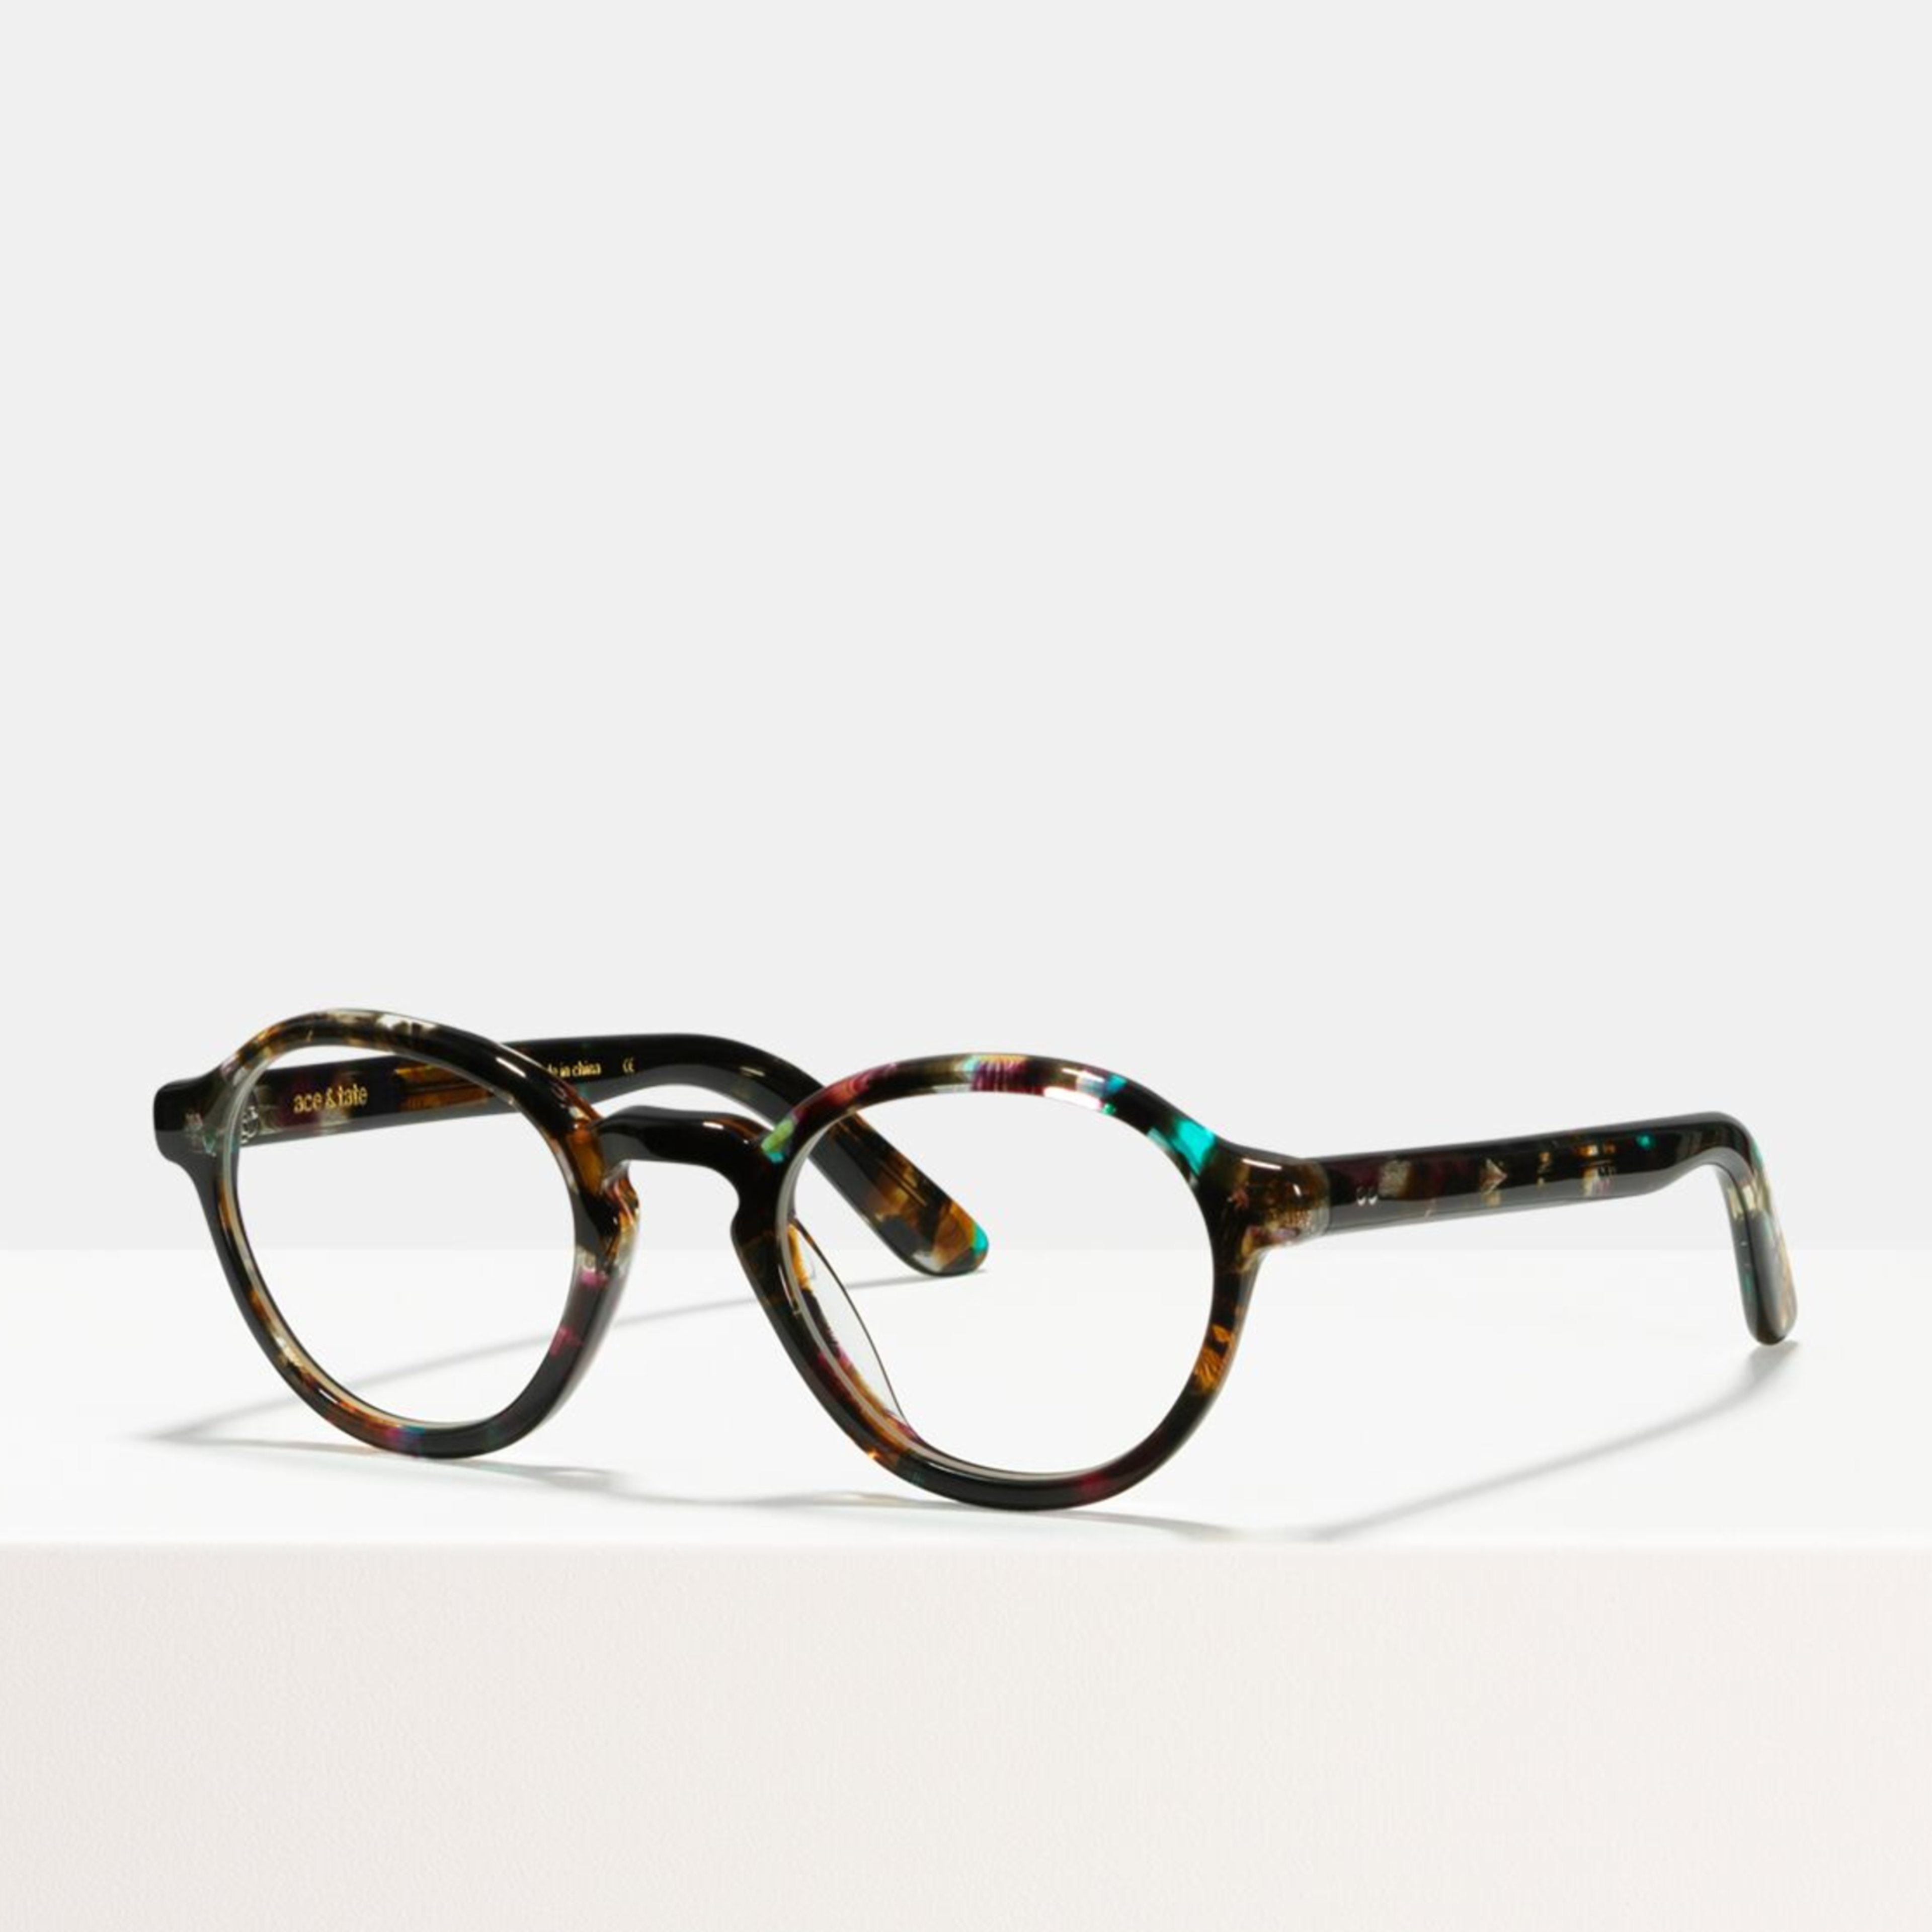 Ace & Tate Glasses | round acetate in Black, Blue, Brown, Pink